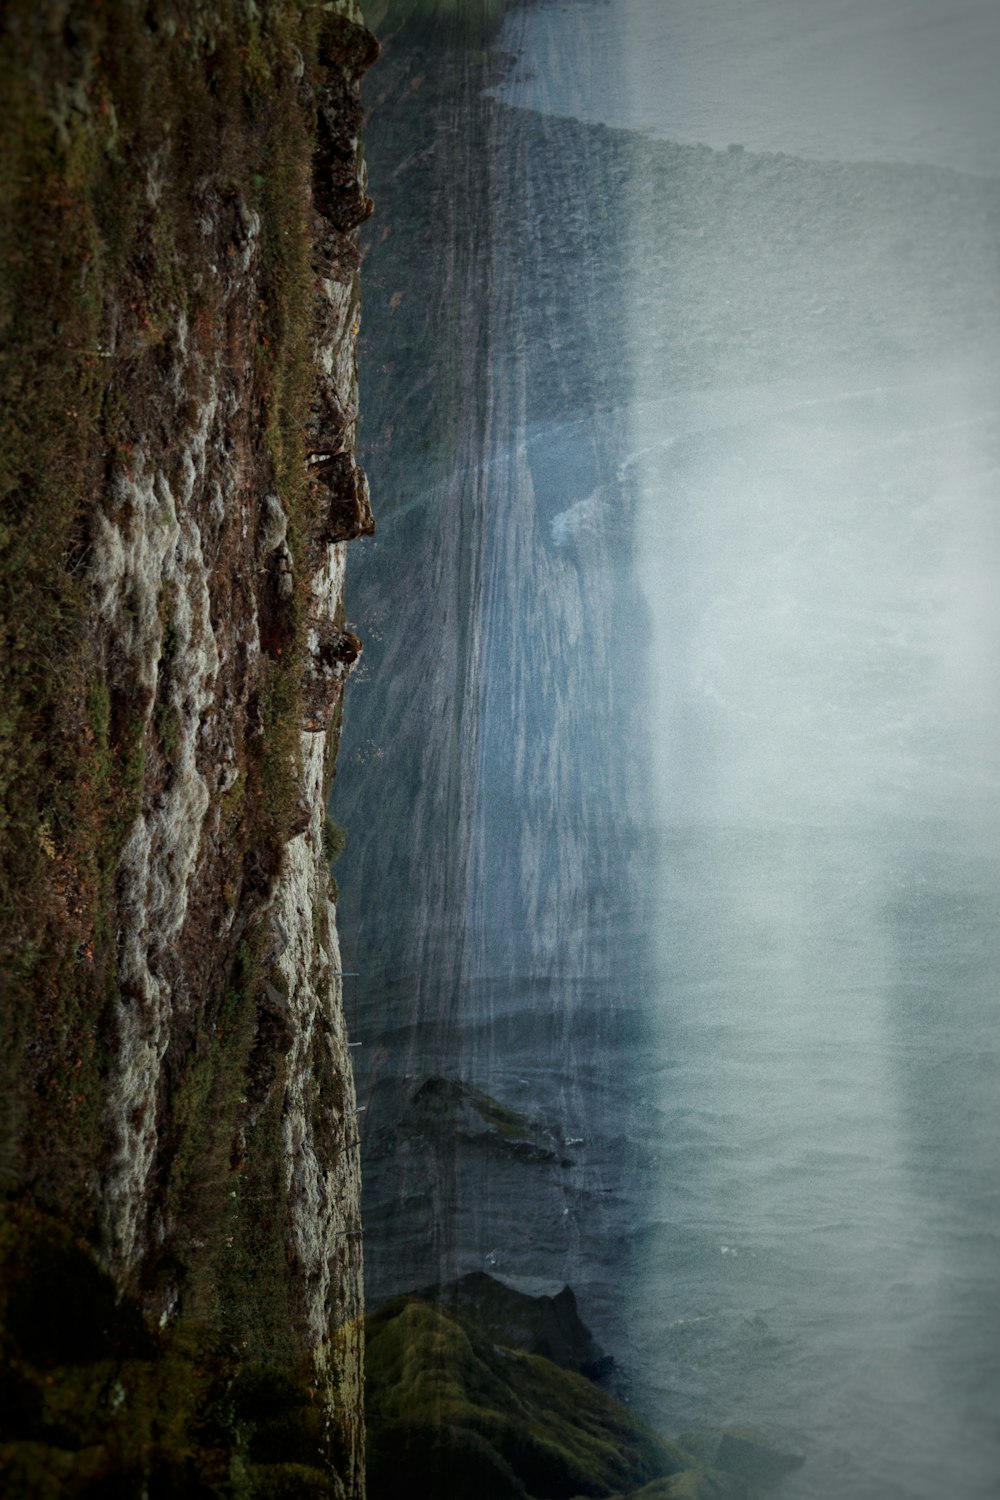 a bird perched on the side of a cliff next to a body of water